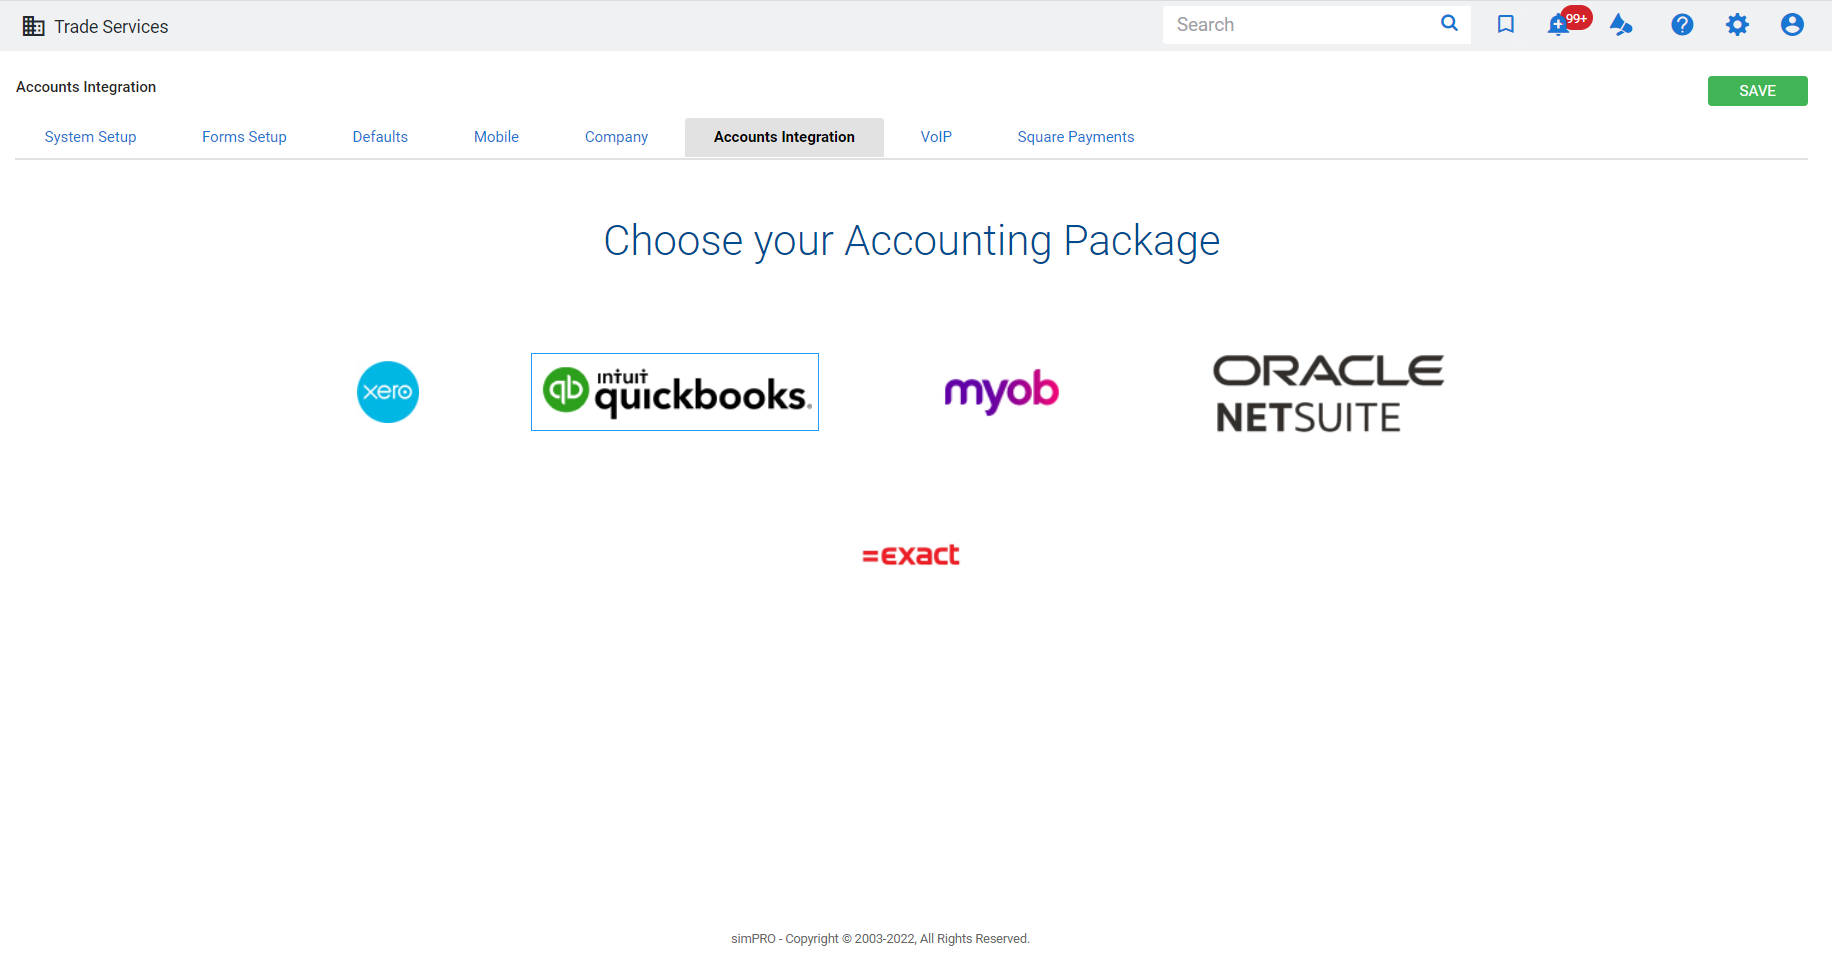 A screenshot of the Accounts Integration tab in System Setup.